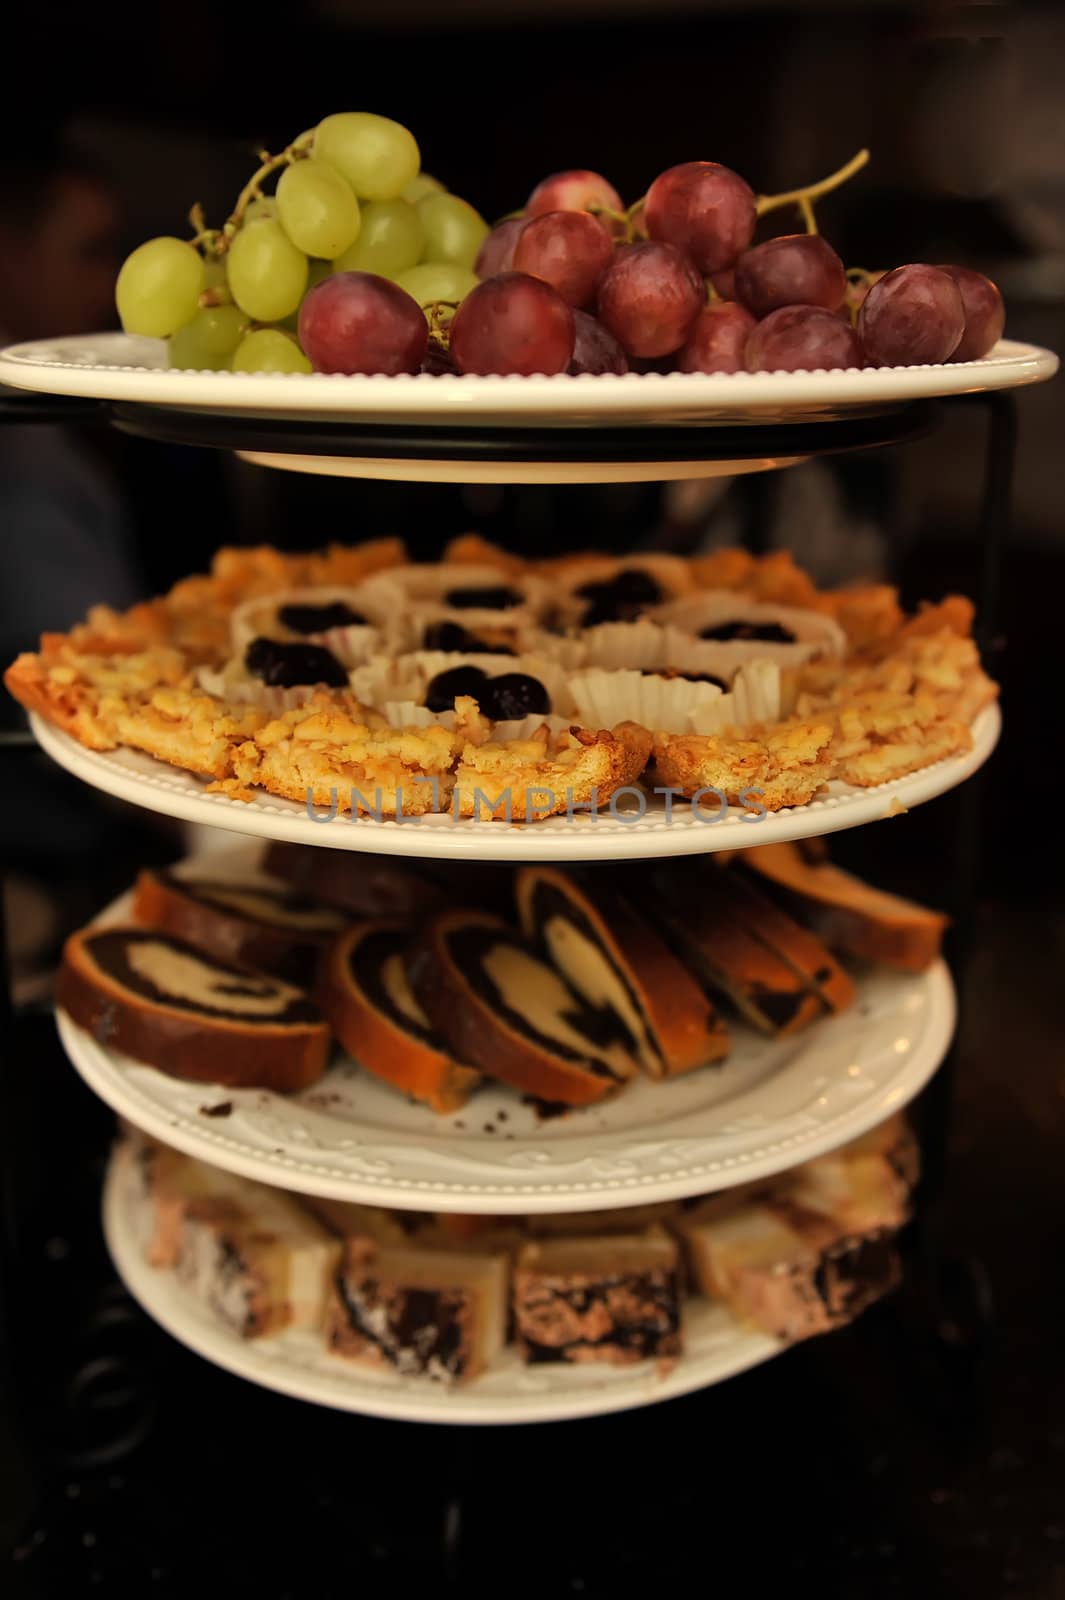 Stack of plates with grapes and various cakes